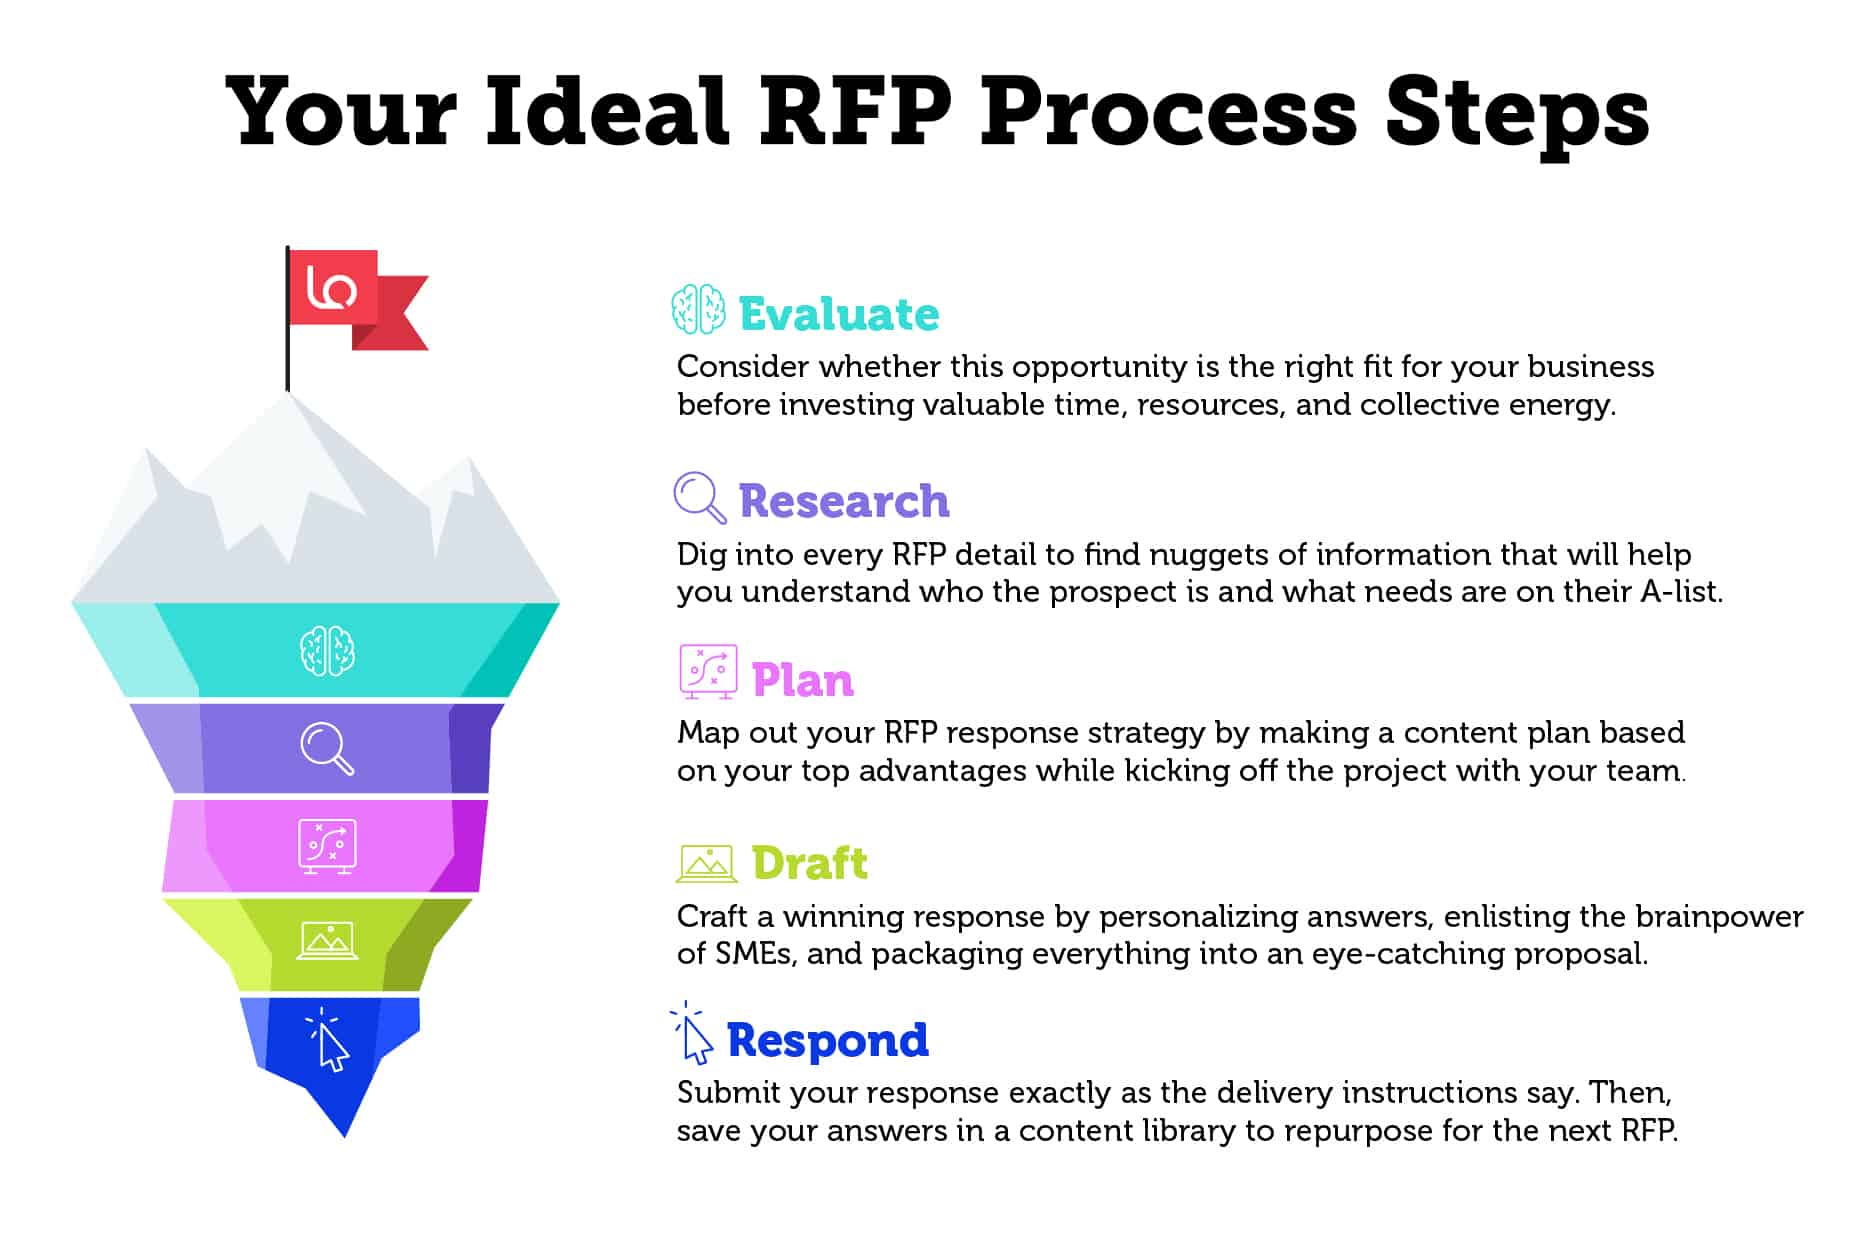 Your Ideal RFP Process Steps